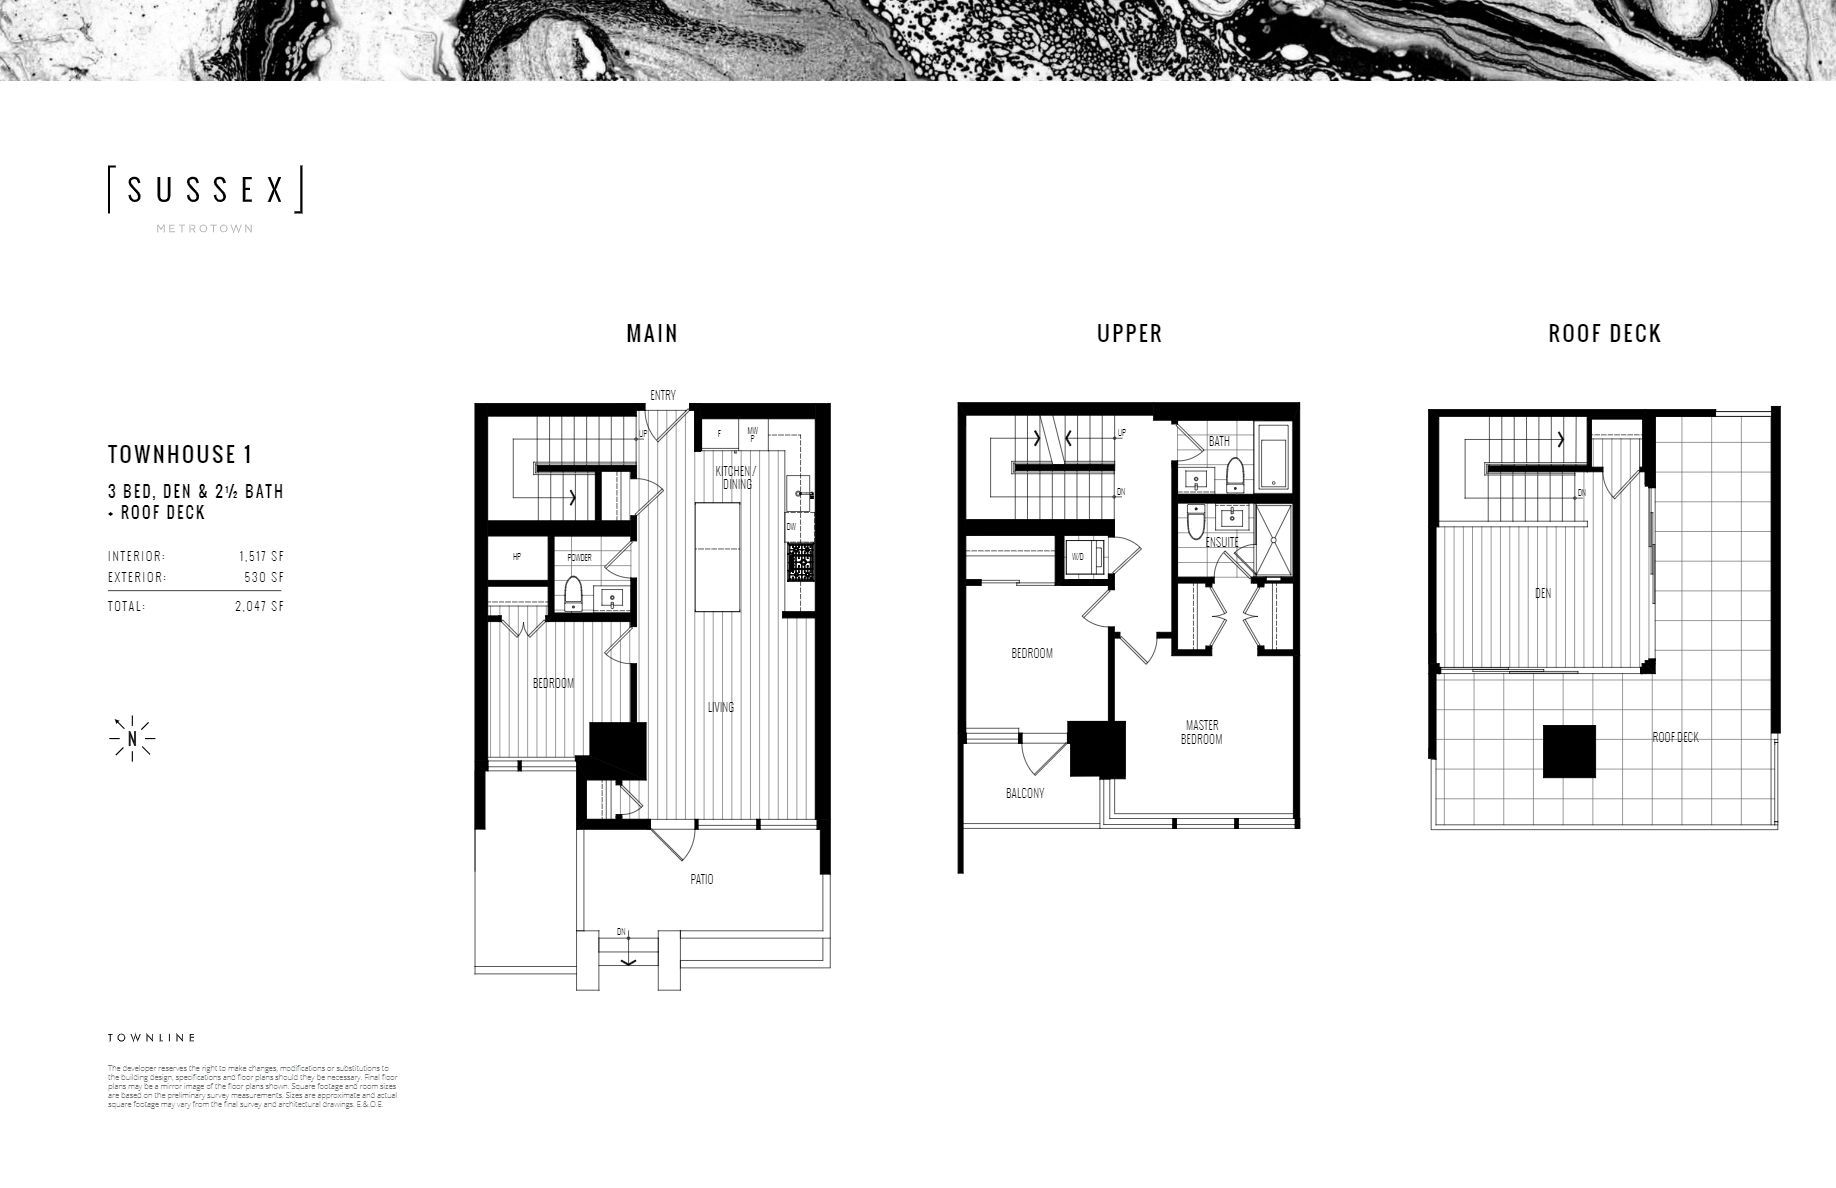  Townhouse 1  Floor Plan of Sussex Condos with undefined beds